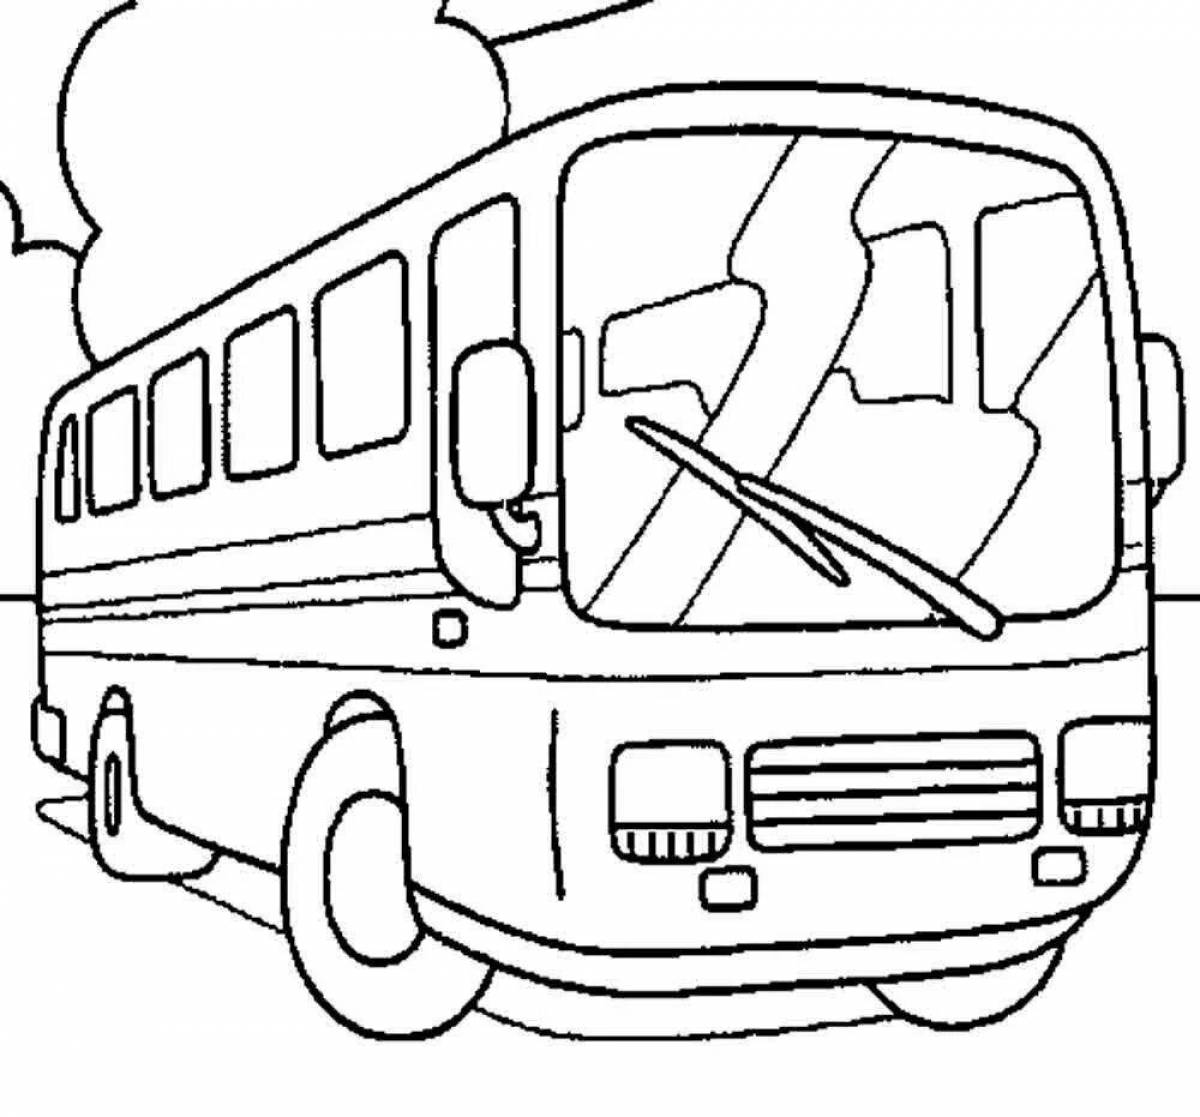 Fabulous bus coloring pages for children 2-3 years old